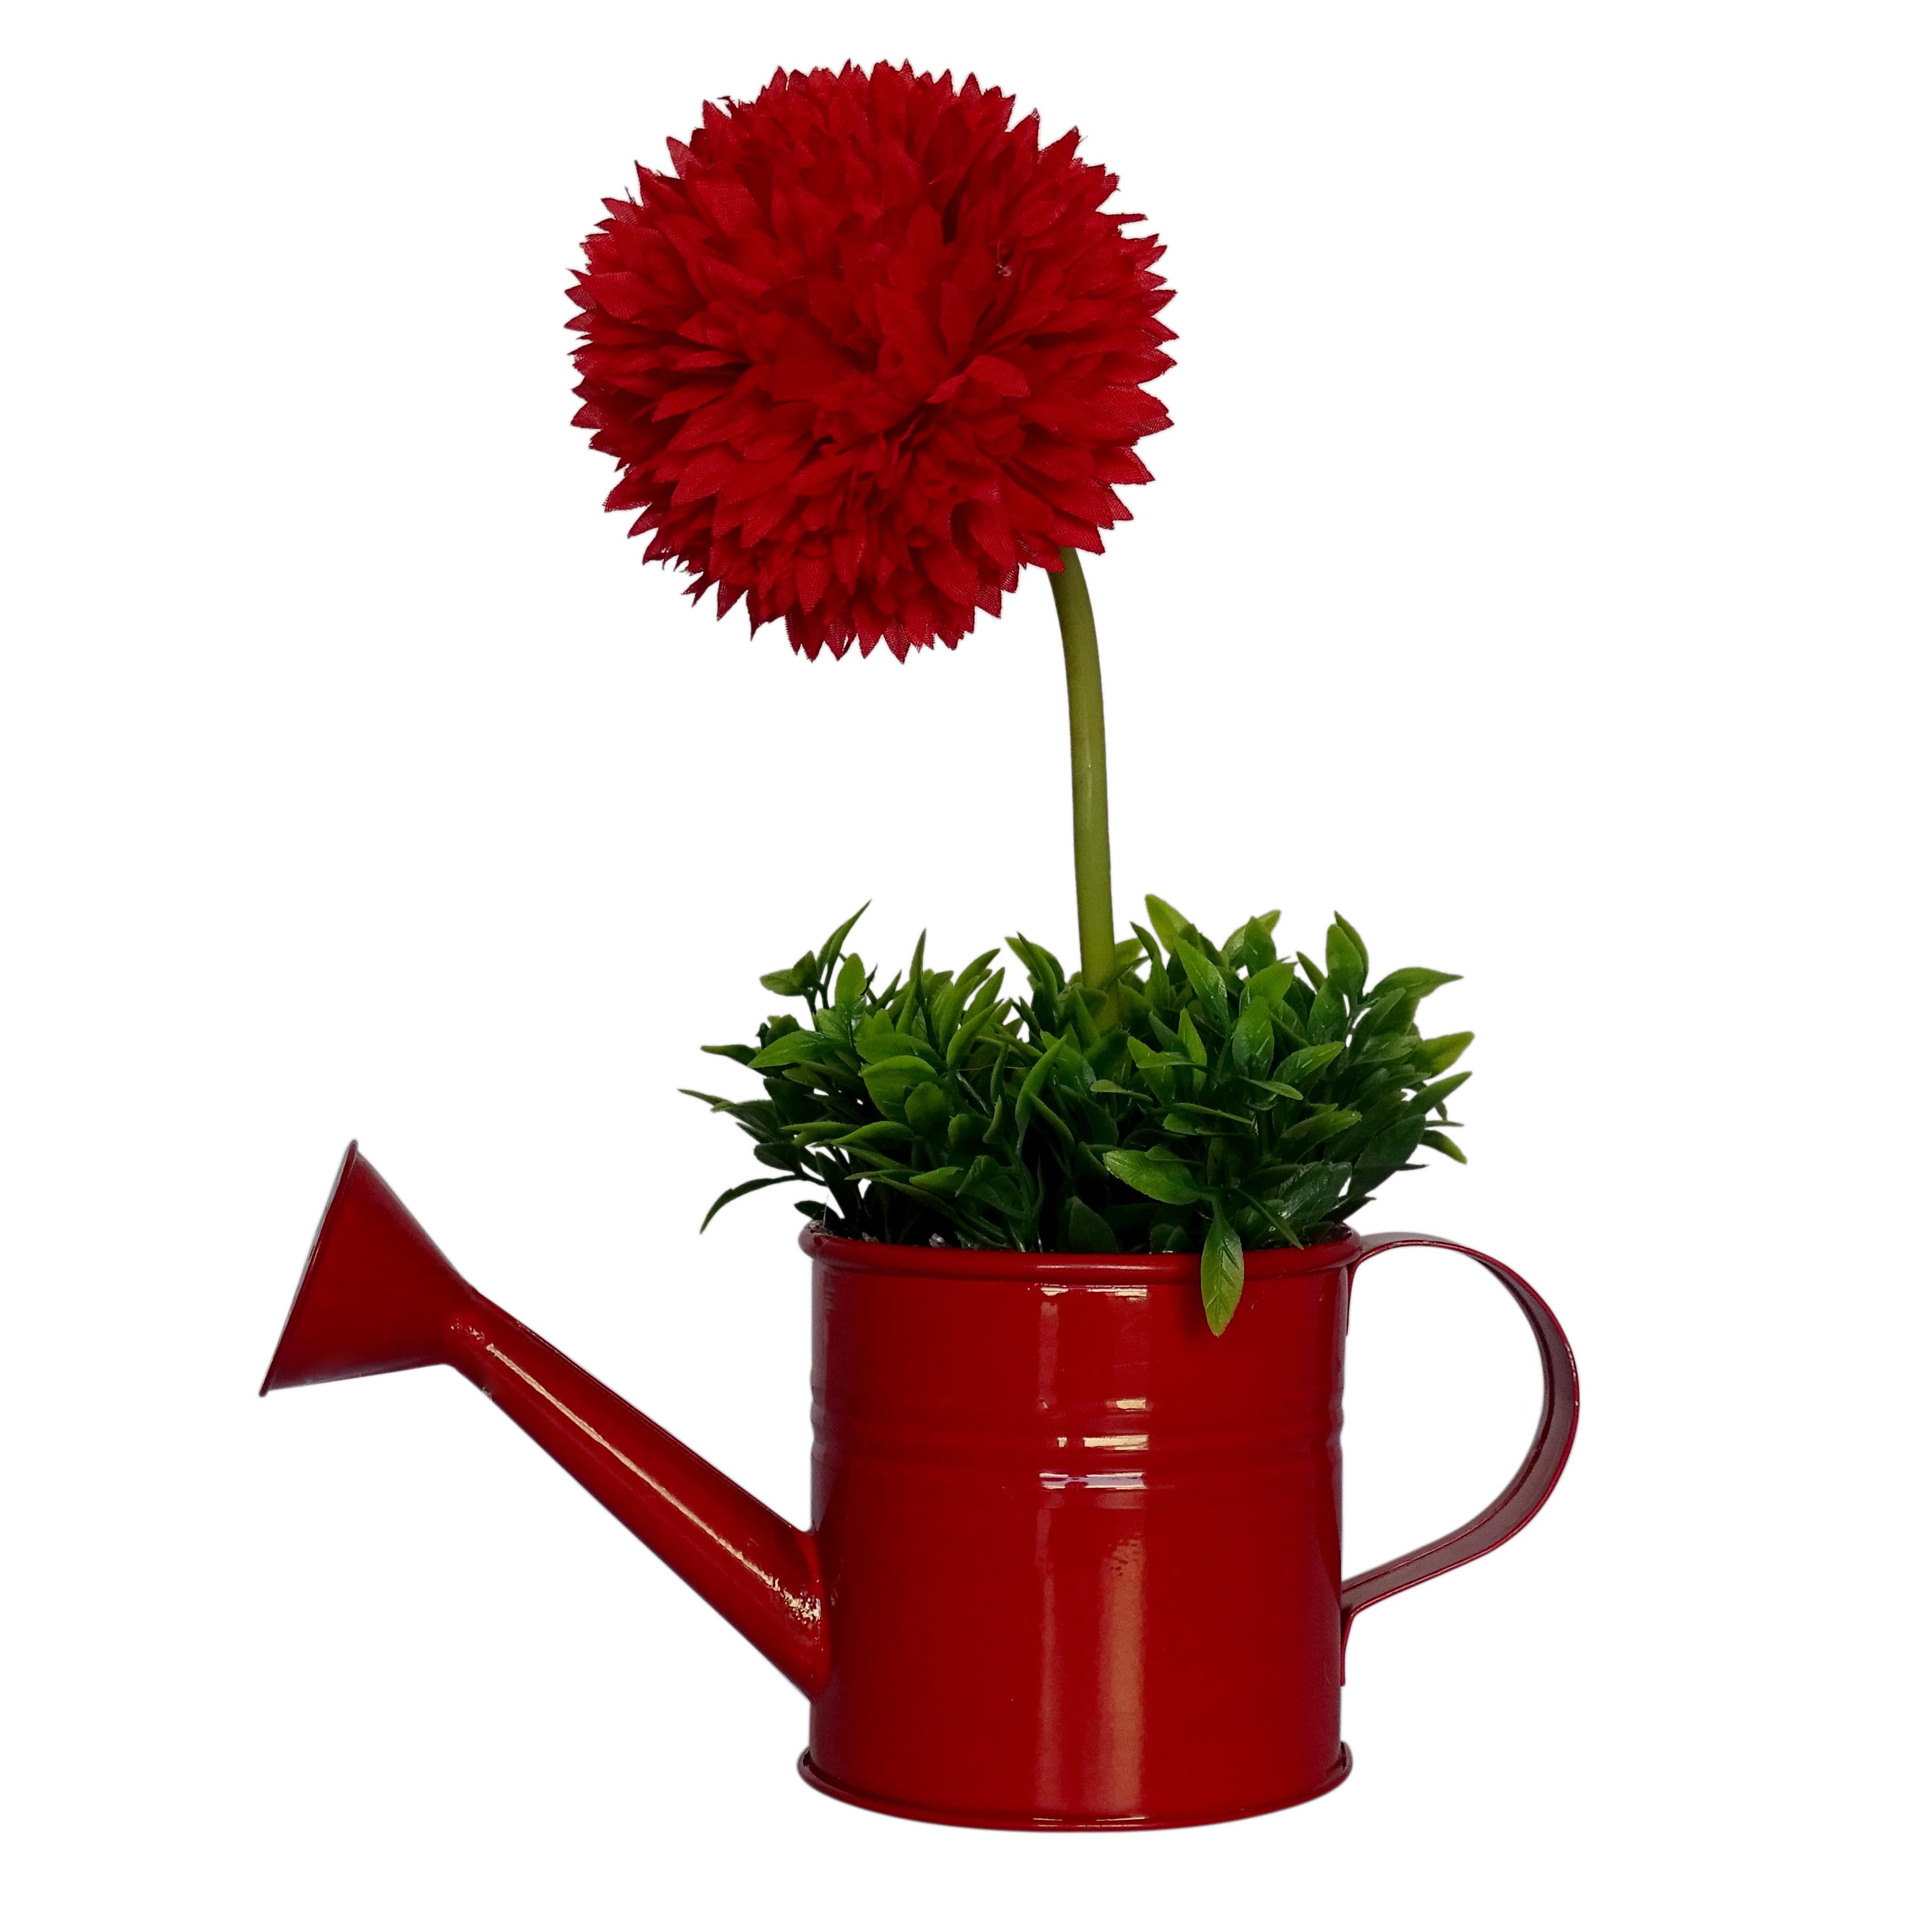 Artificial Red Flower With Red Metallic Can - Belfiore Stores